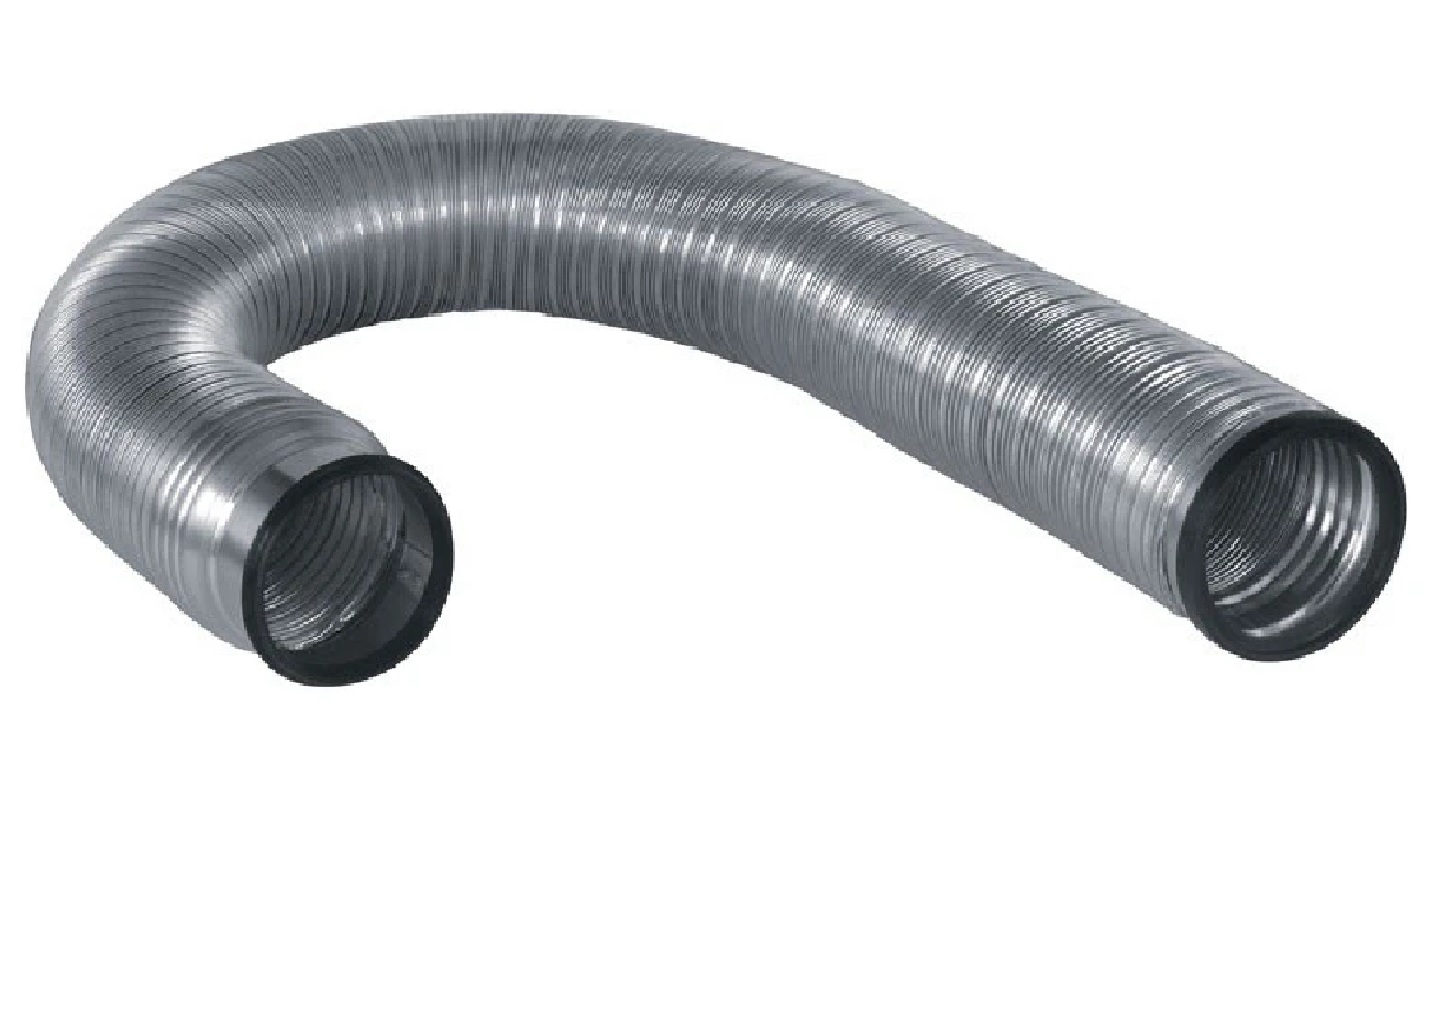 Imperial VT0616 Imperial Quick Connect Hook-Up 4 In. x 6 Ft. Aluminum Semi-Rigid Dryer Duct VT0616